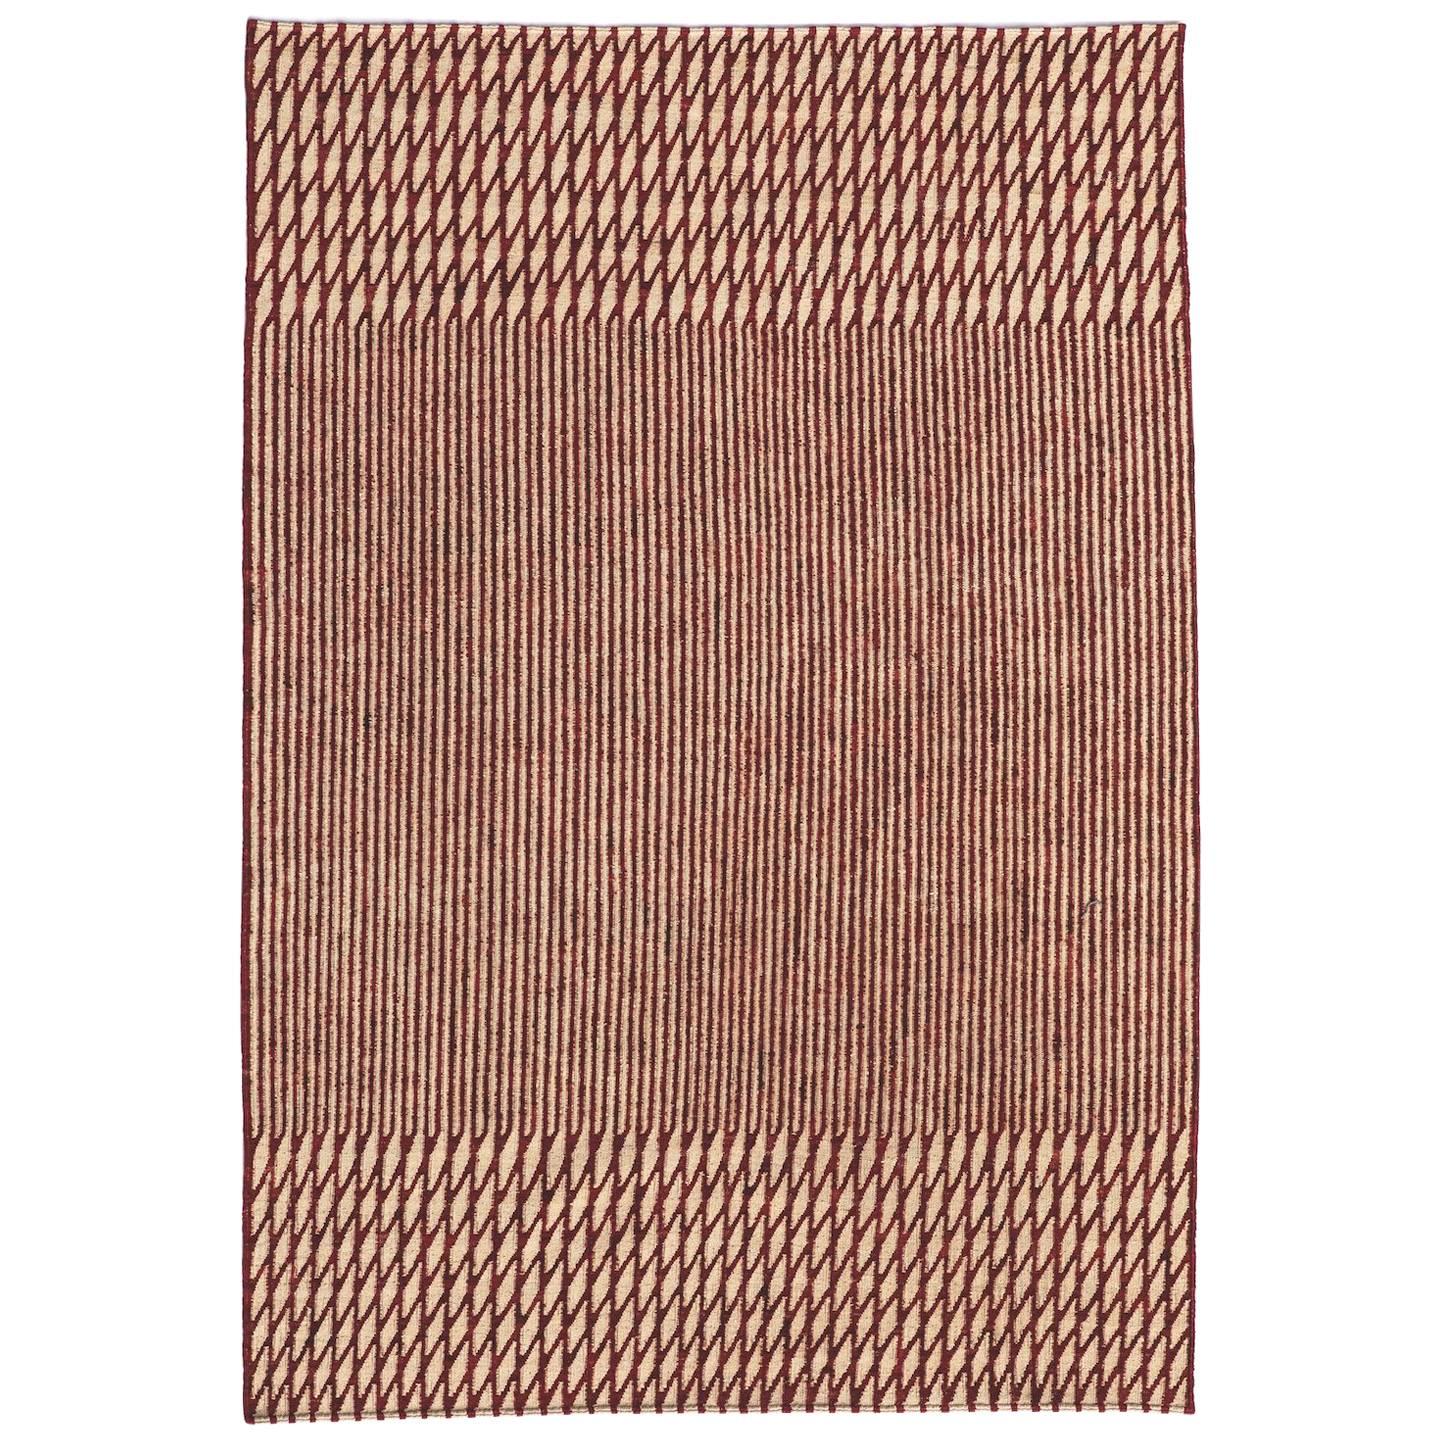 Hand-Spun Nanimarquina Blur Rug in Red by Ronan & Erwan Bouroullec, Small For Sale